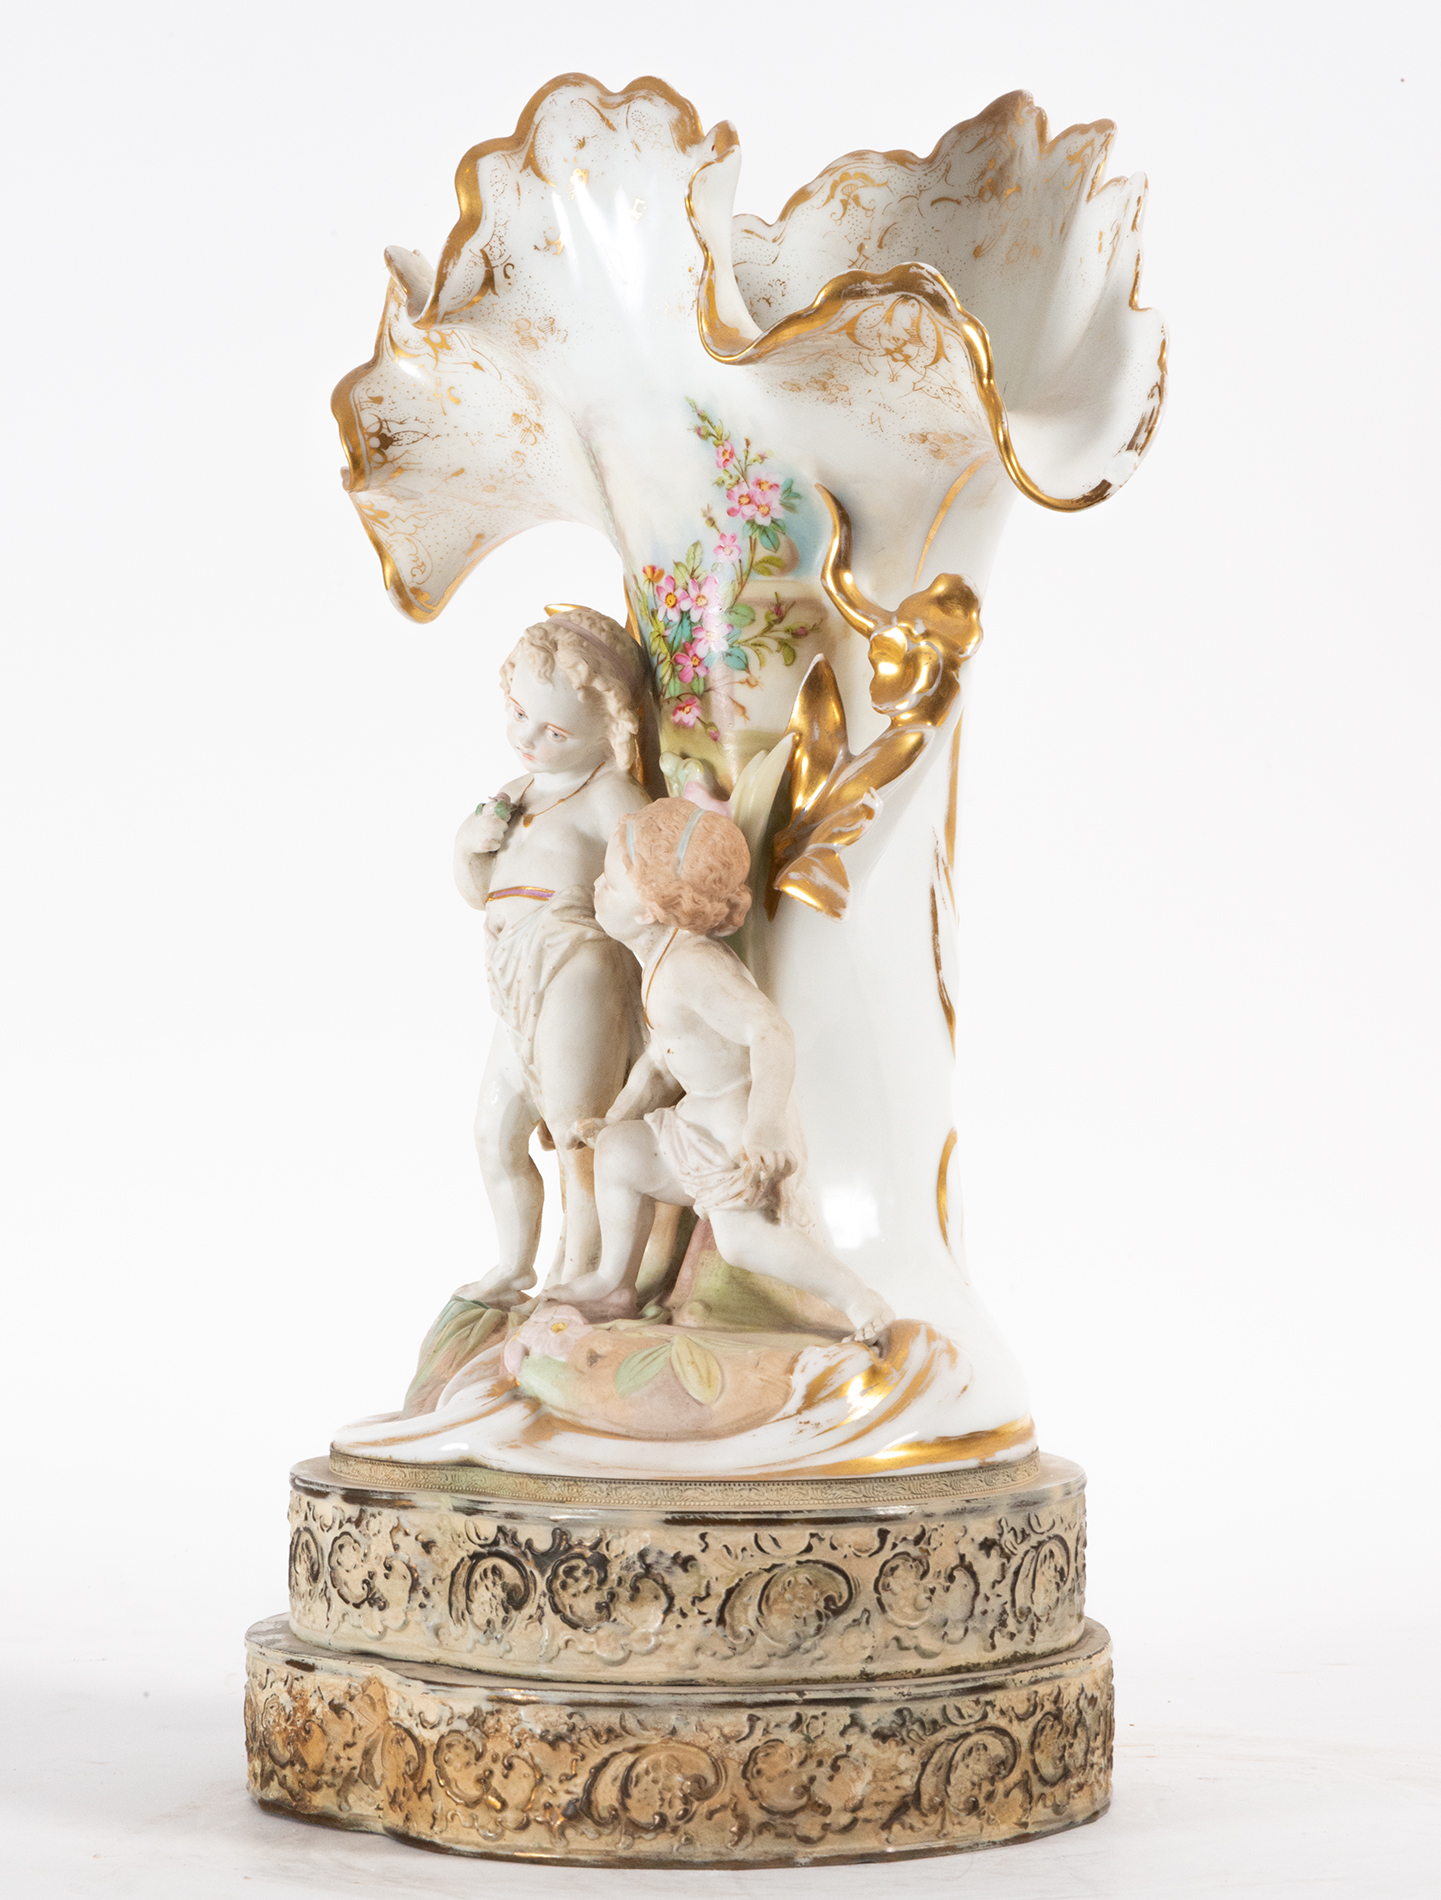 Pair of Vases with Little Shepherds in glazed biscuit porcelain, 19th century - Image 7 of 8